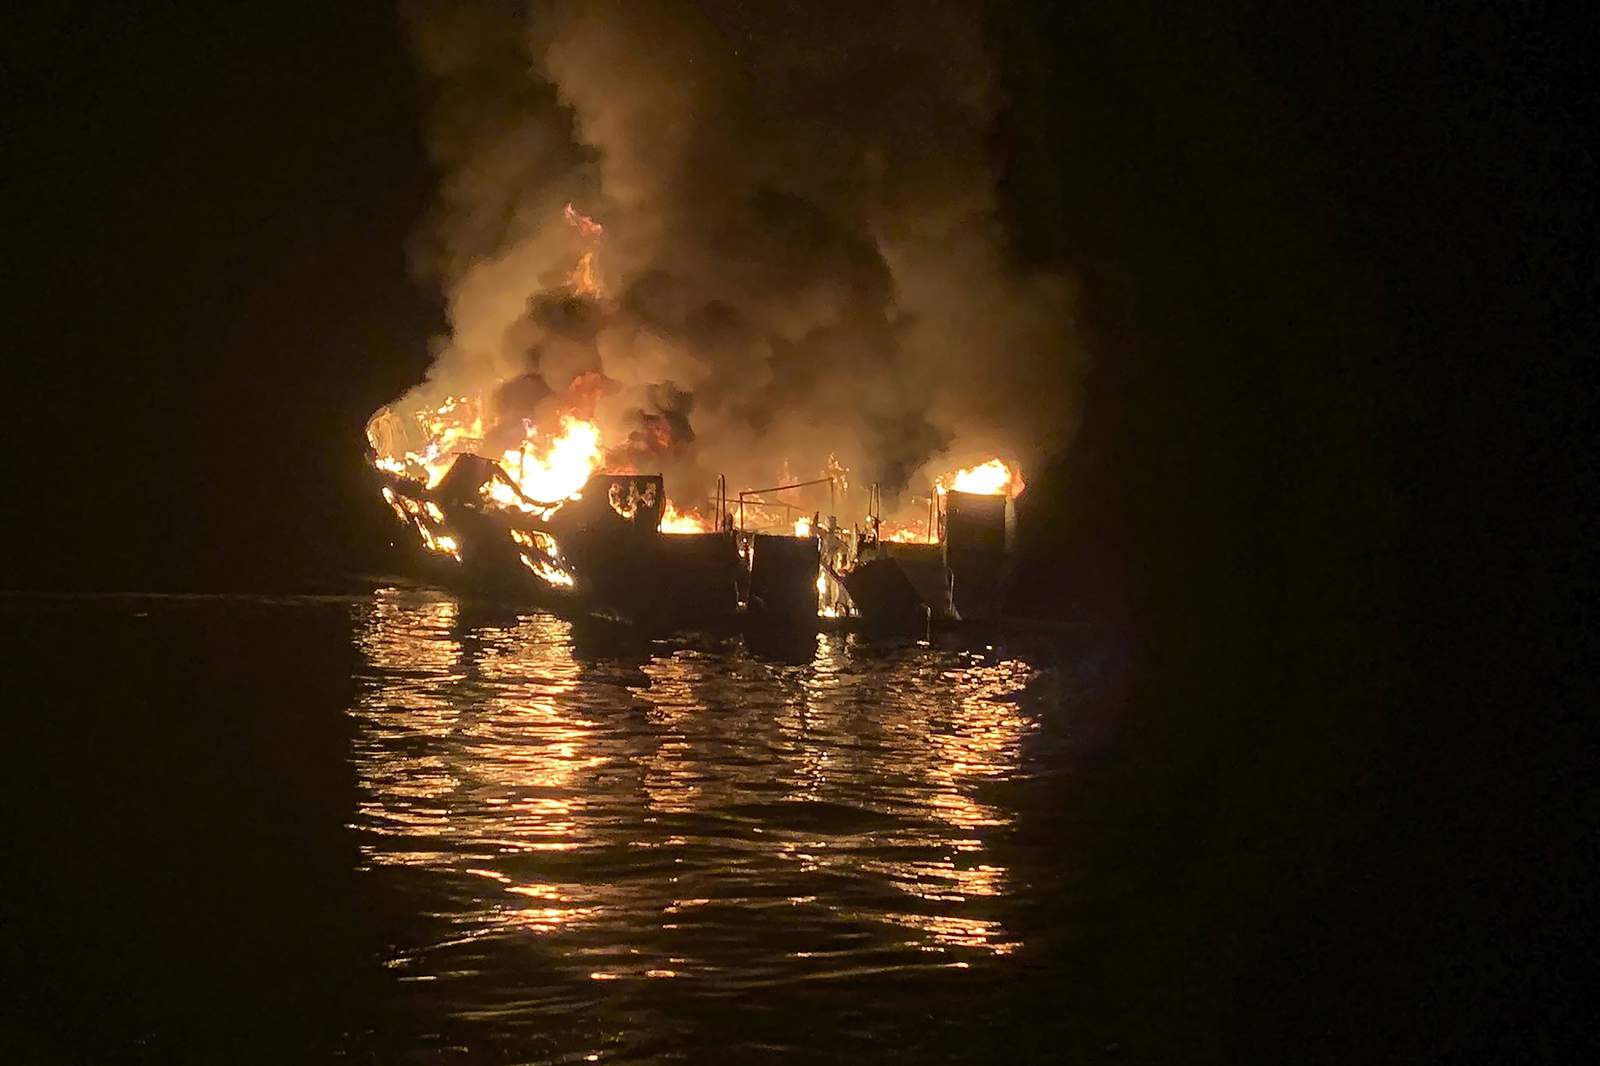 Captain pleads not guilty to manslaughter in boat fire